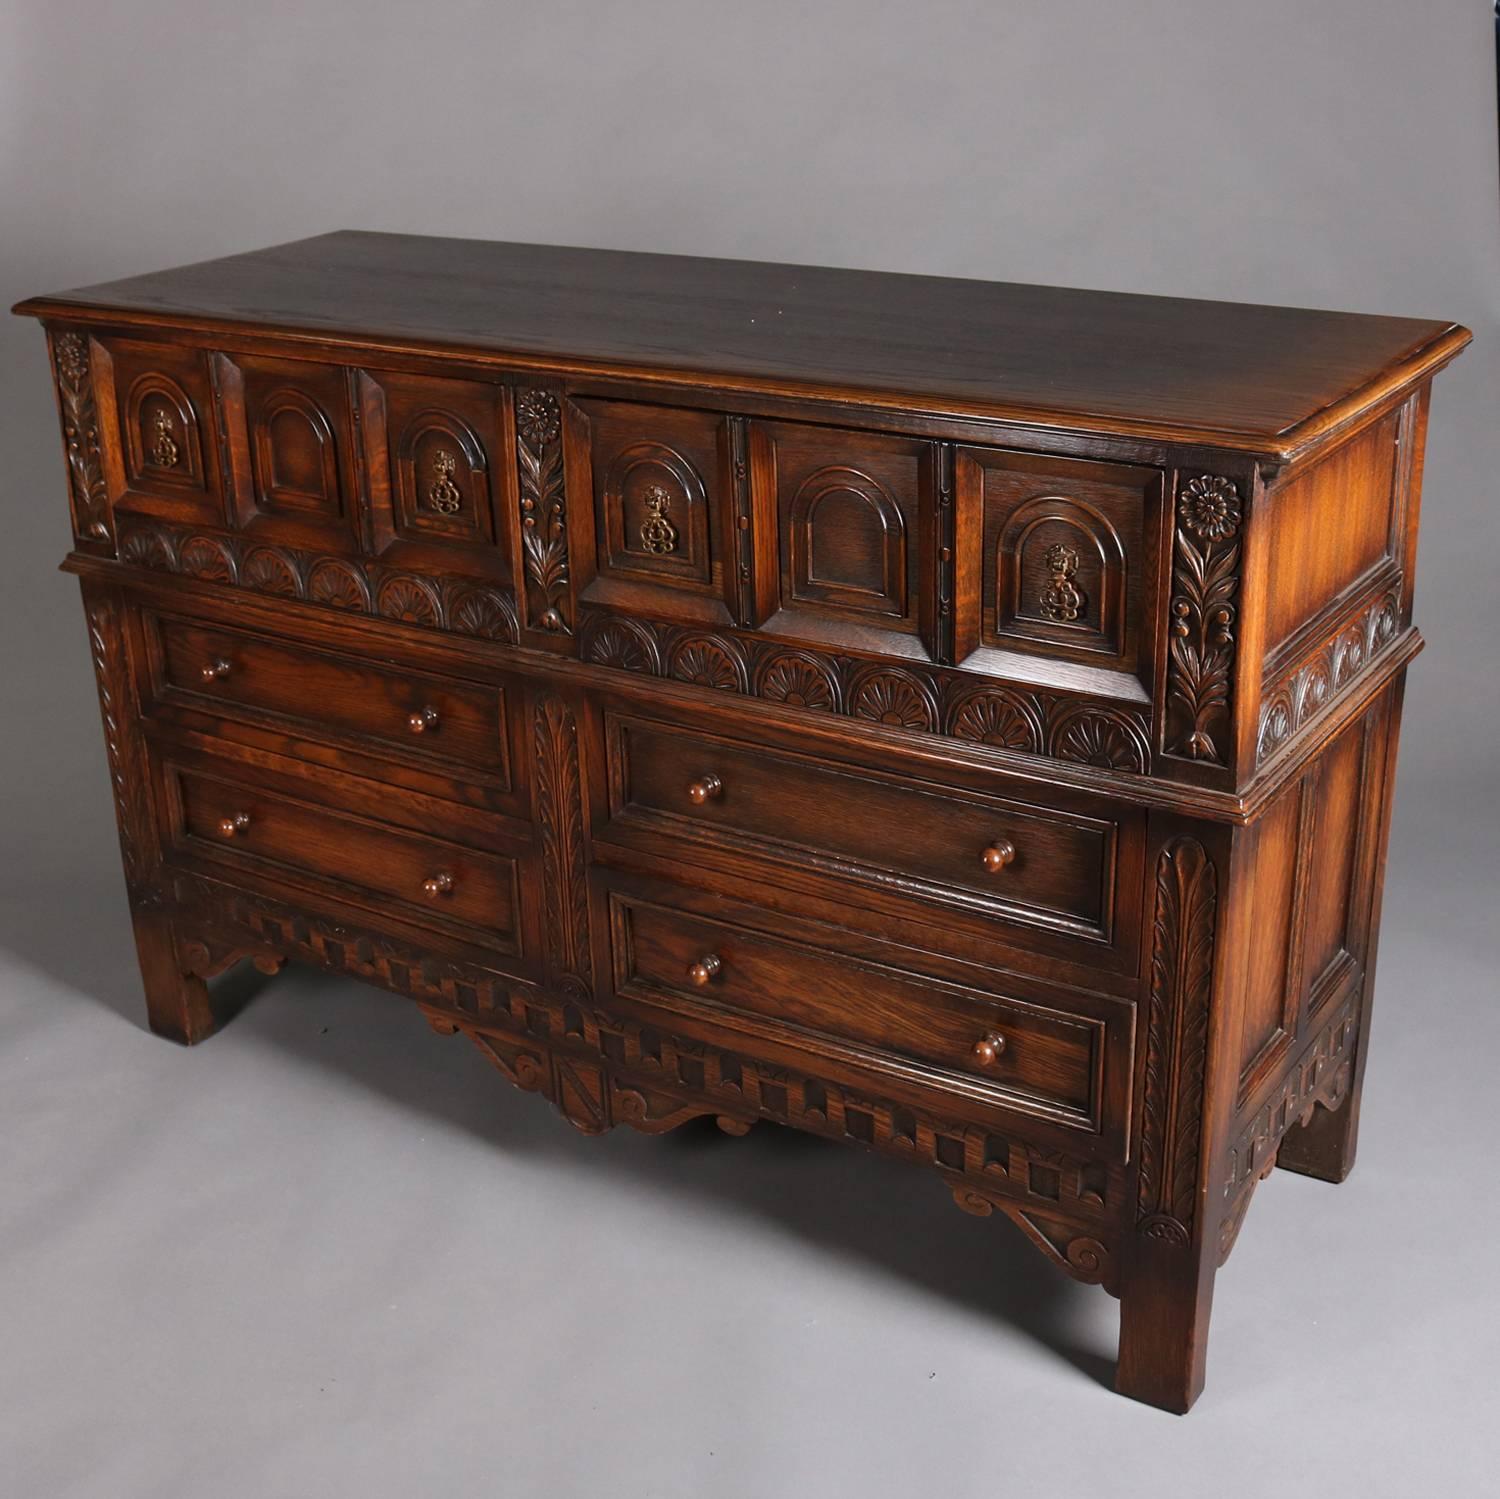 Antique Edwardian oak server features Jacobean influence with heavily carved sunburst and foliate bordering, paneled sides and front including arched reserves in upper drawers, and scrolled skirting, en verso original Kittinger Furniture tag, circa